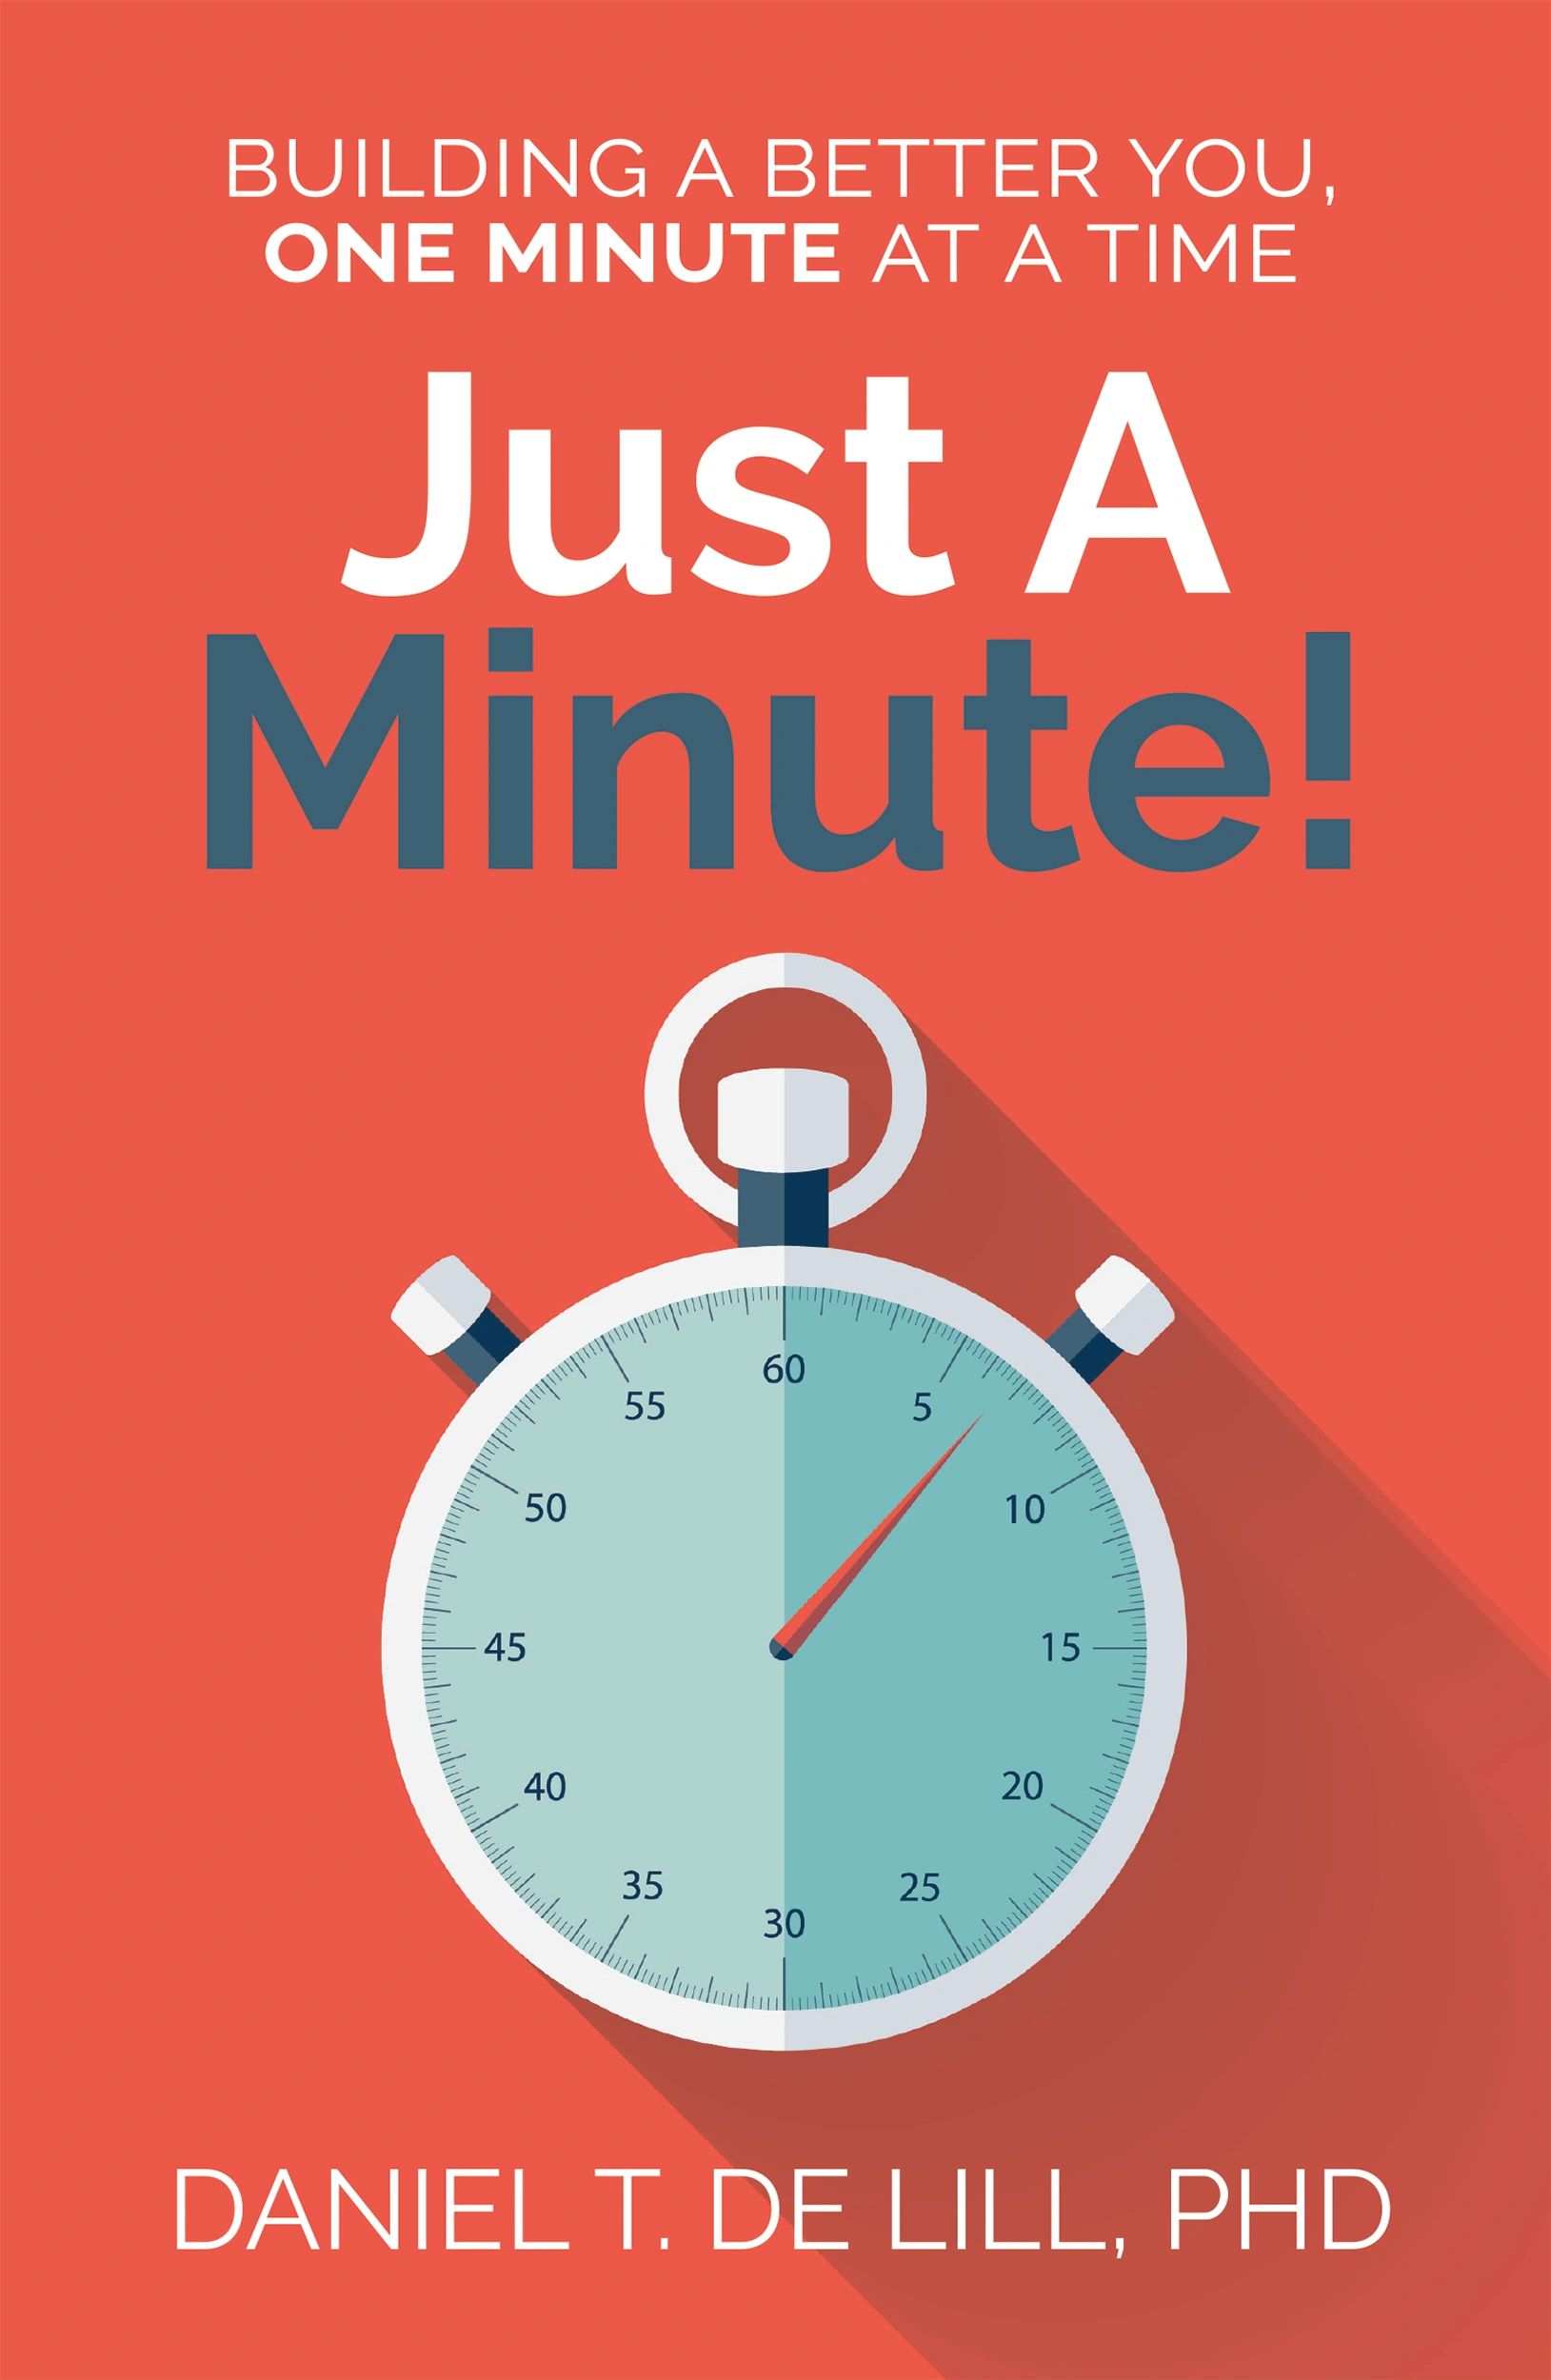 Just a Minute! Building a better you one minute at a time. Living Minutes.